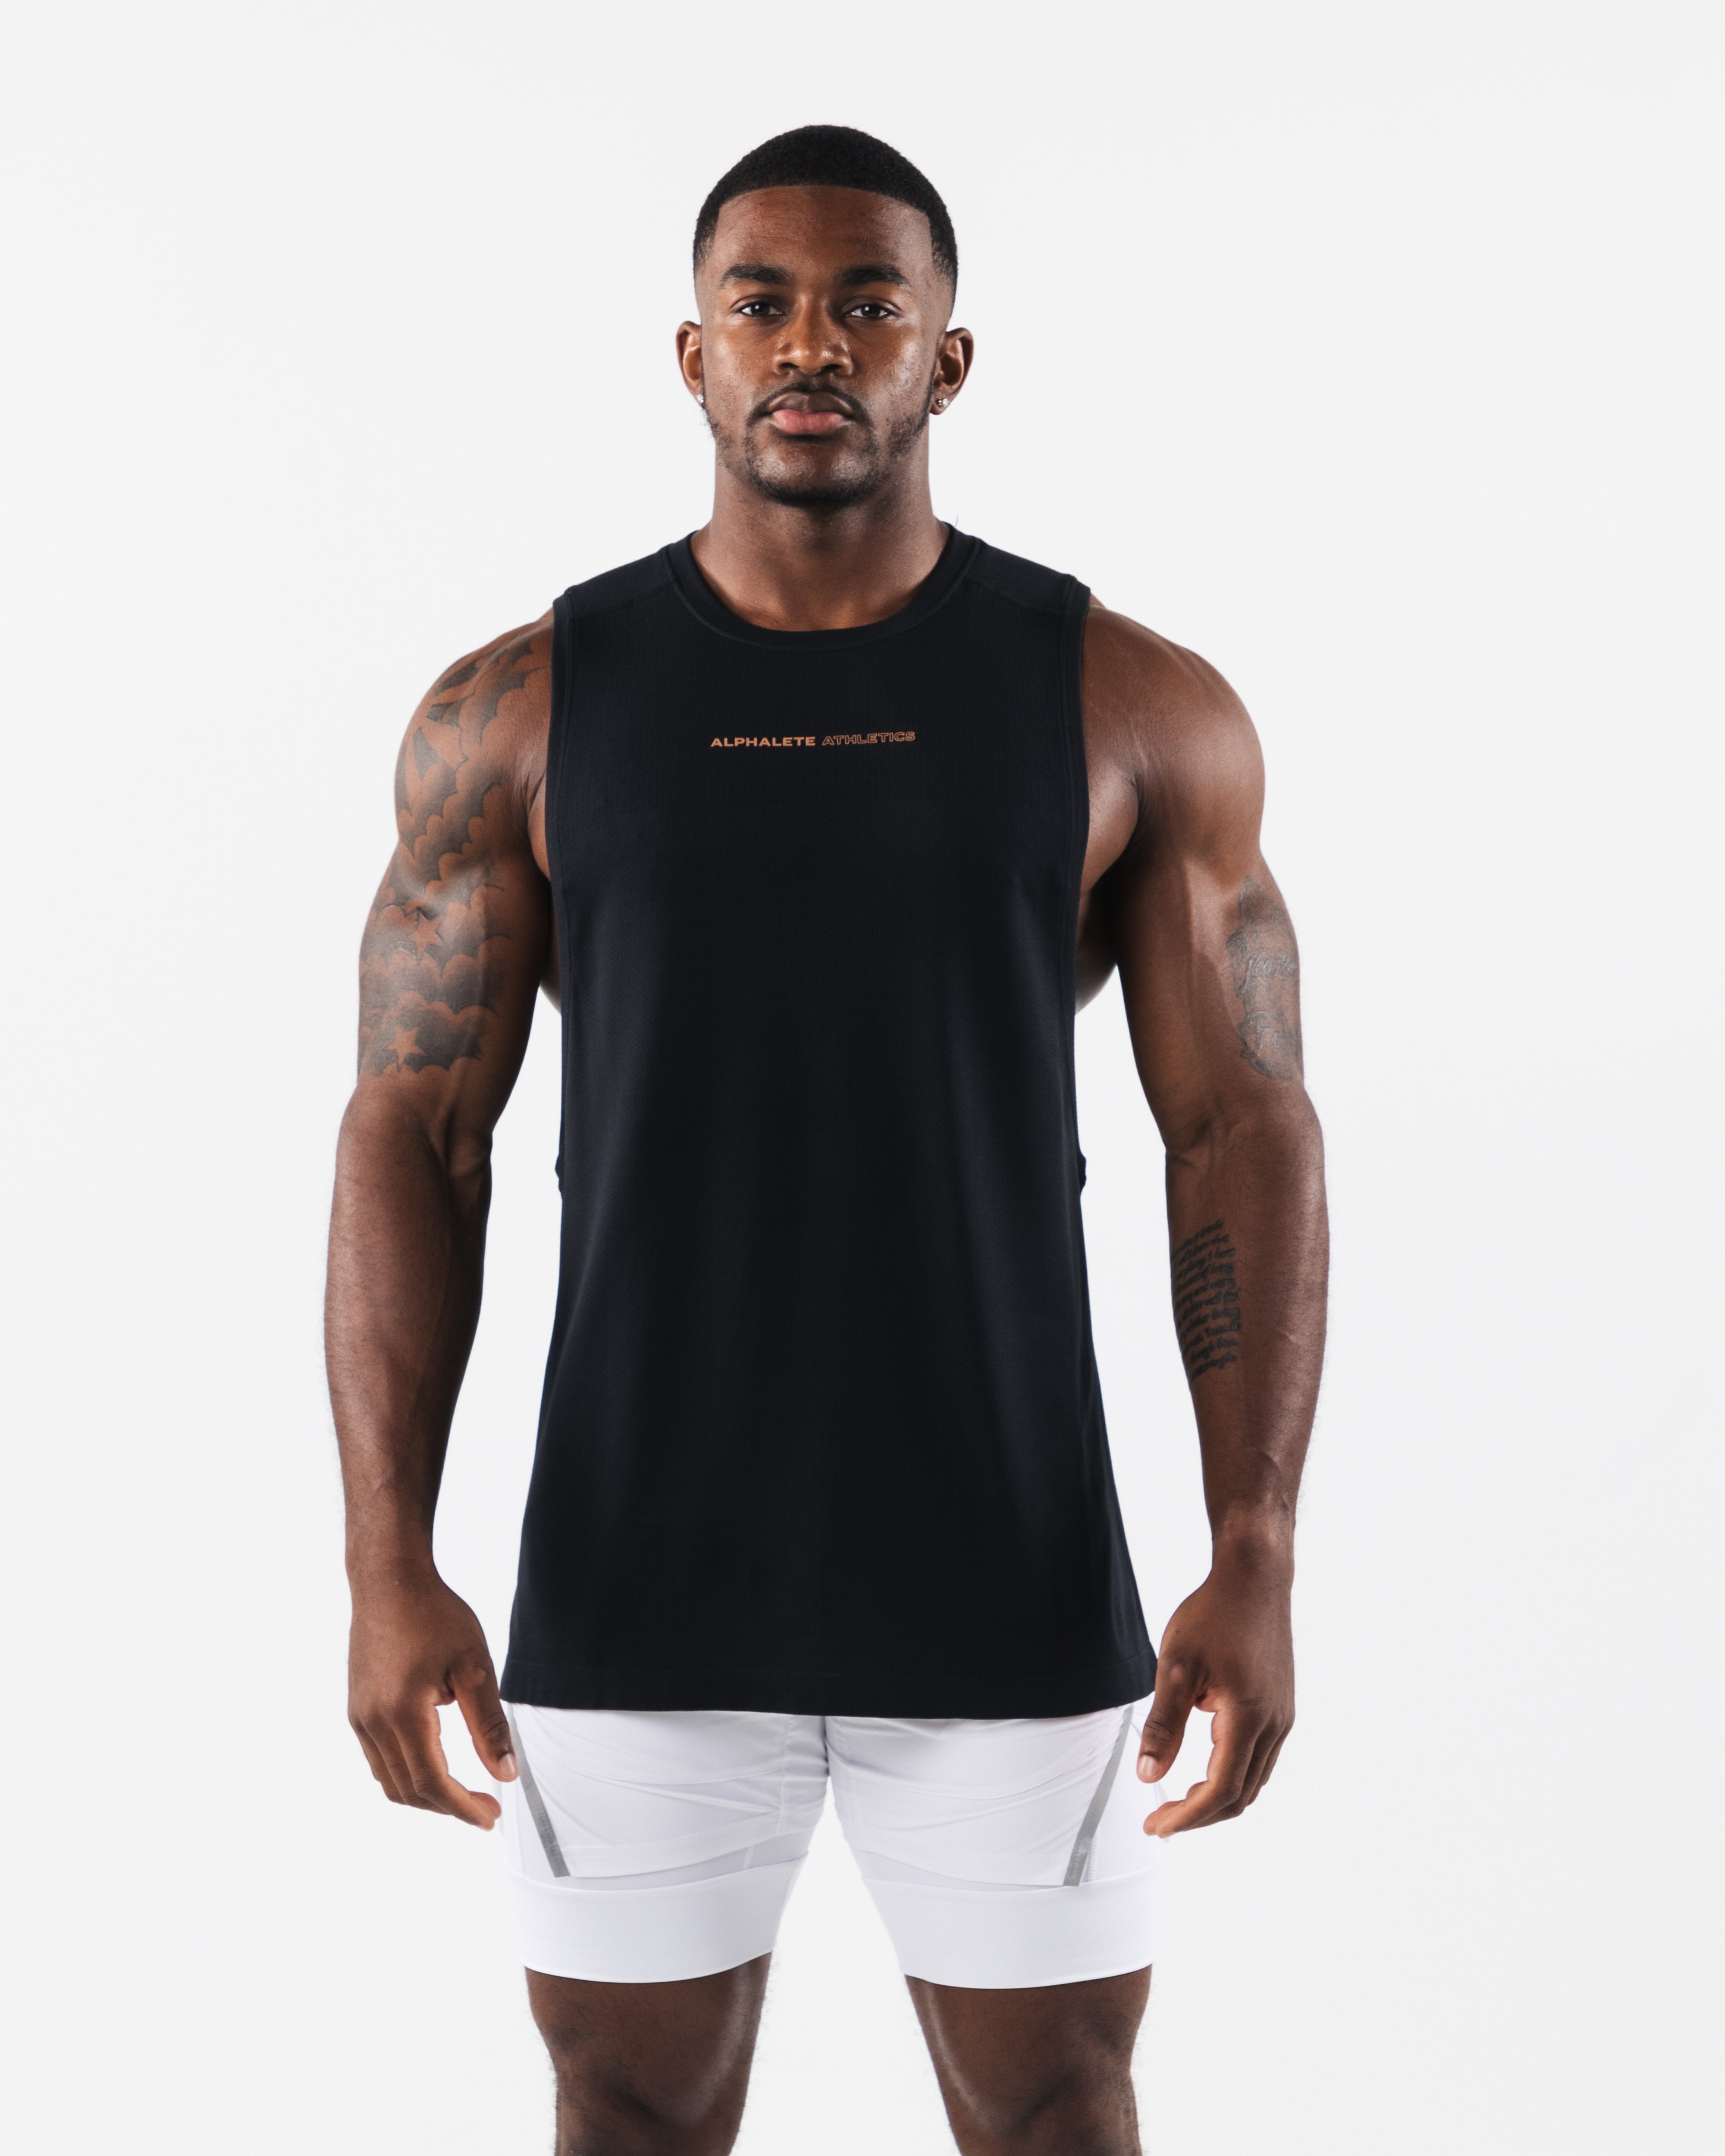 Alphalete - Your first look at our new Performance Cutoff